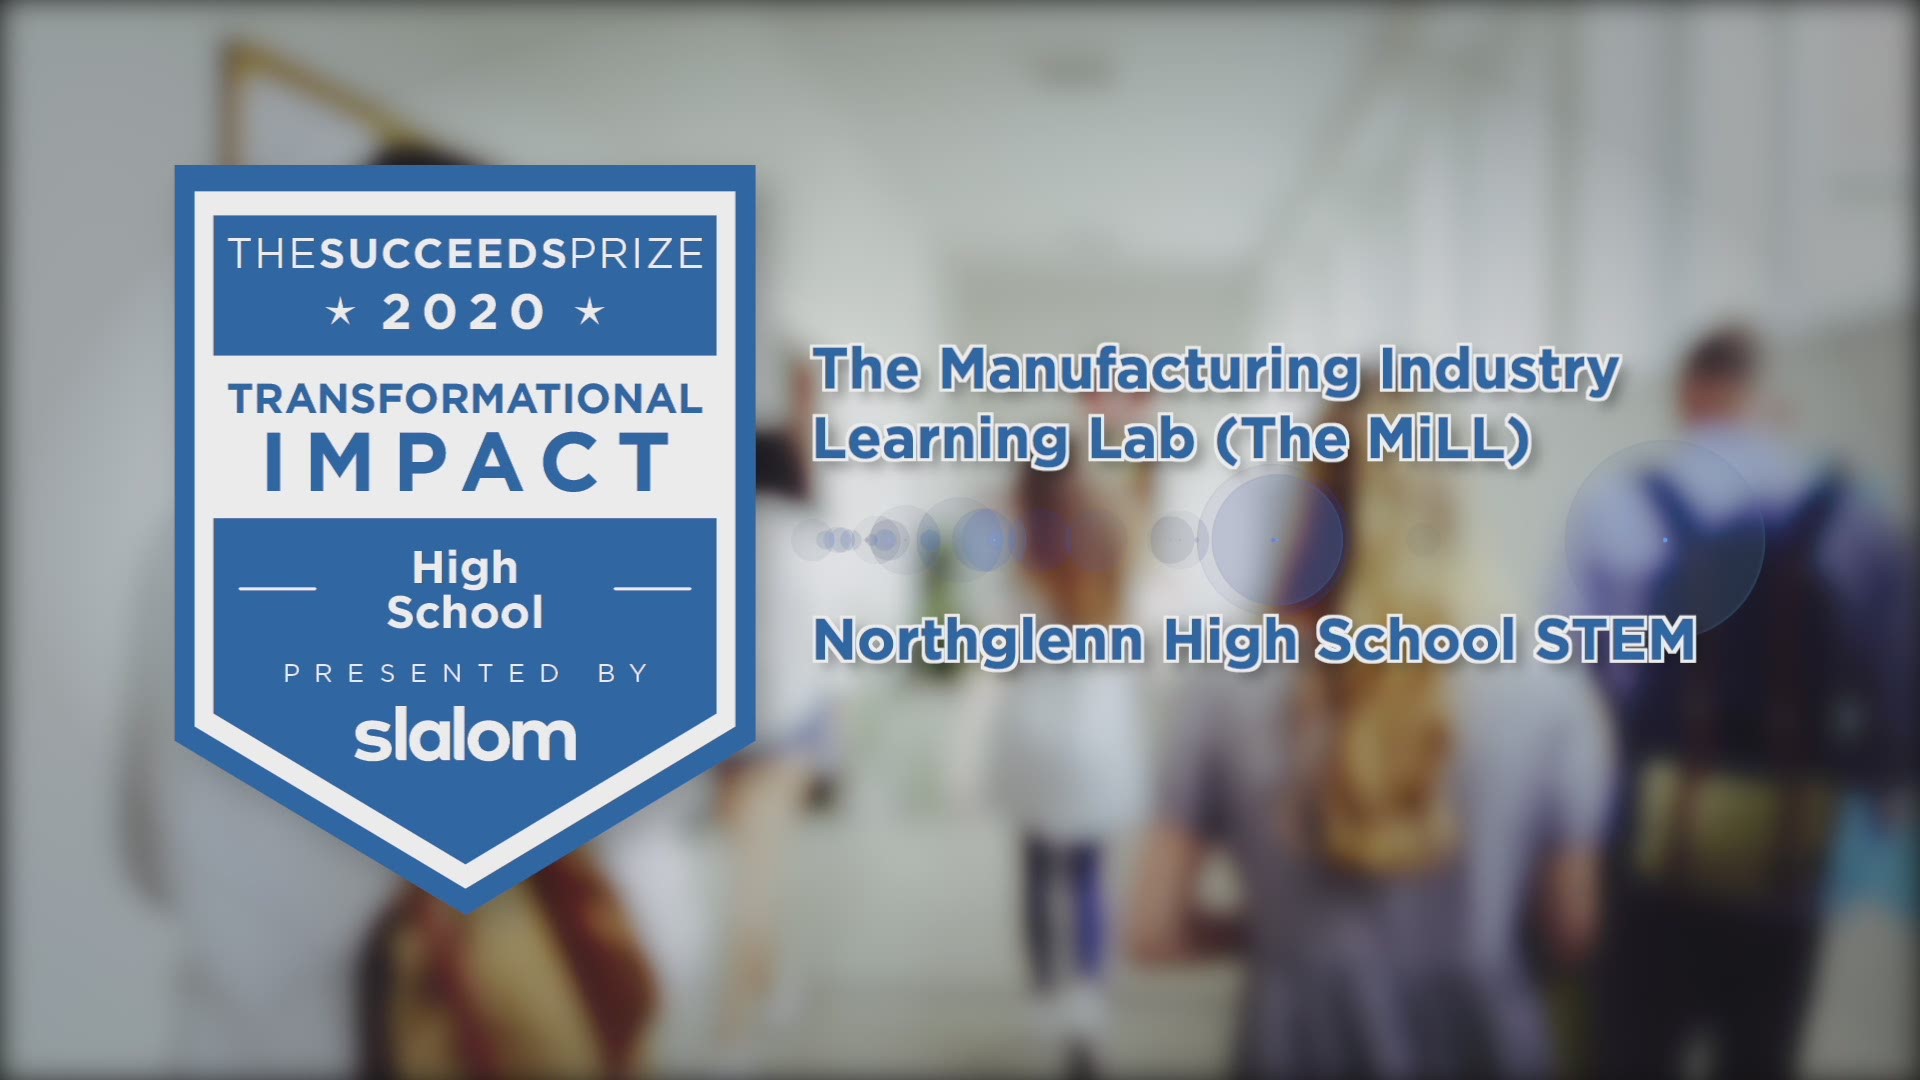 The MiLL National Training Center in the Peyton and Widefield School Districts won the 2020 Succeeds Prize for Transformational Impact in a High School.